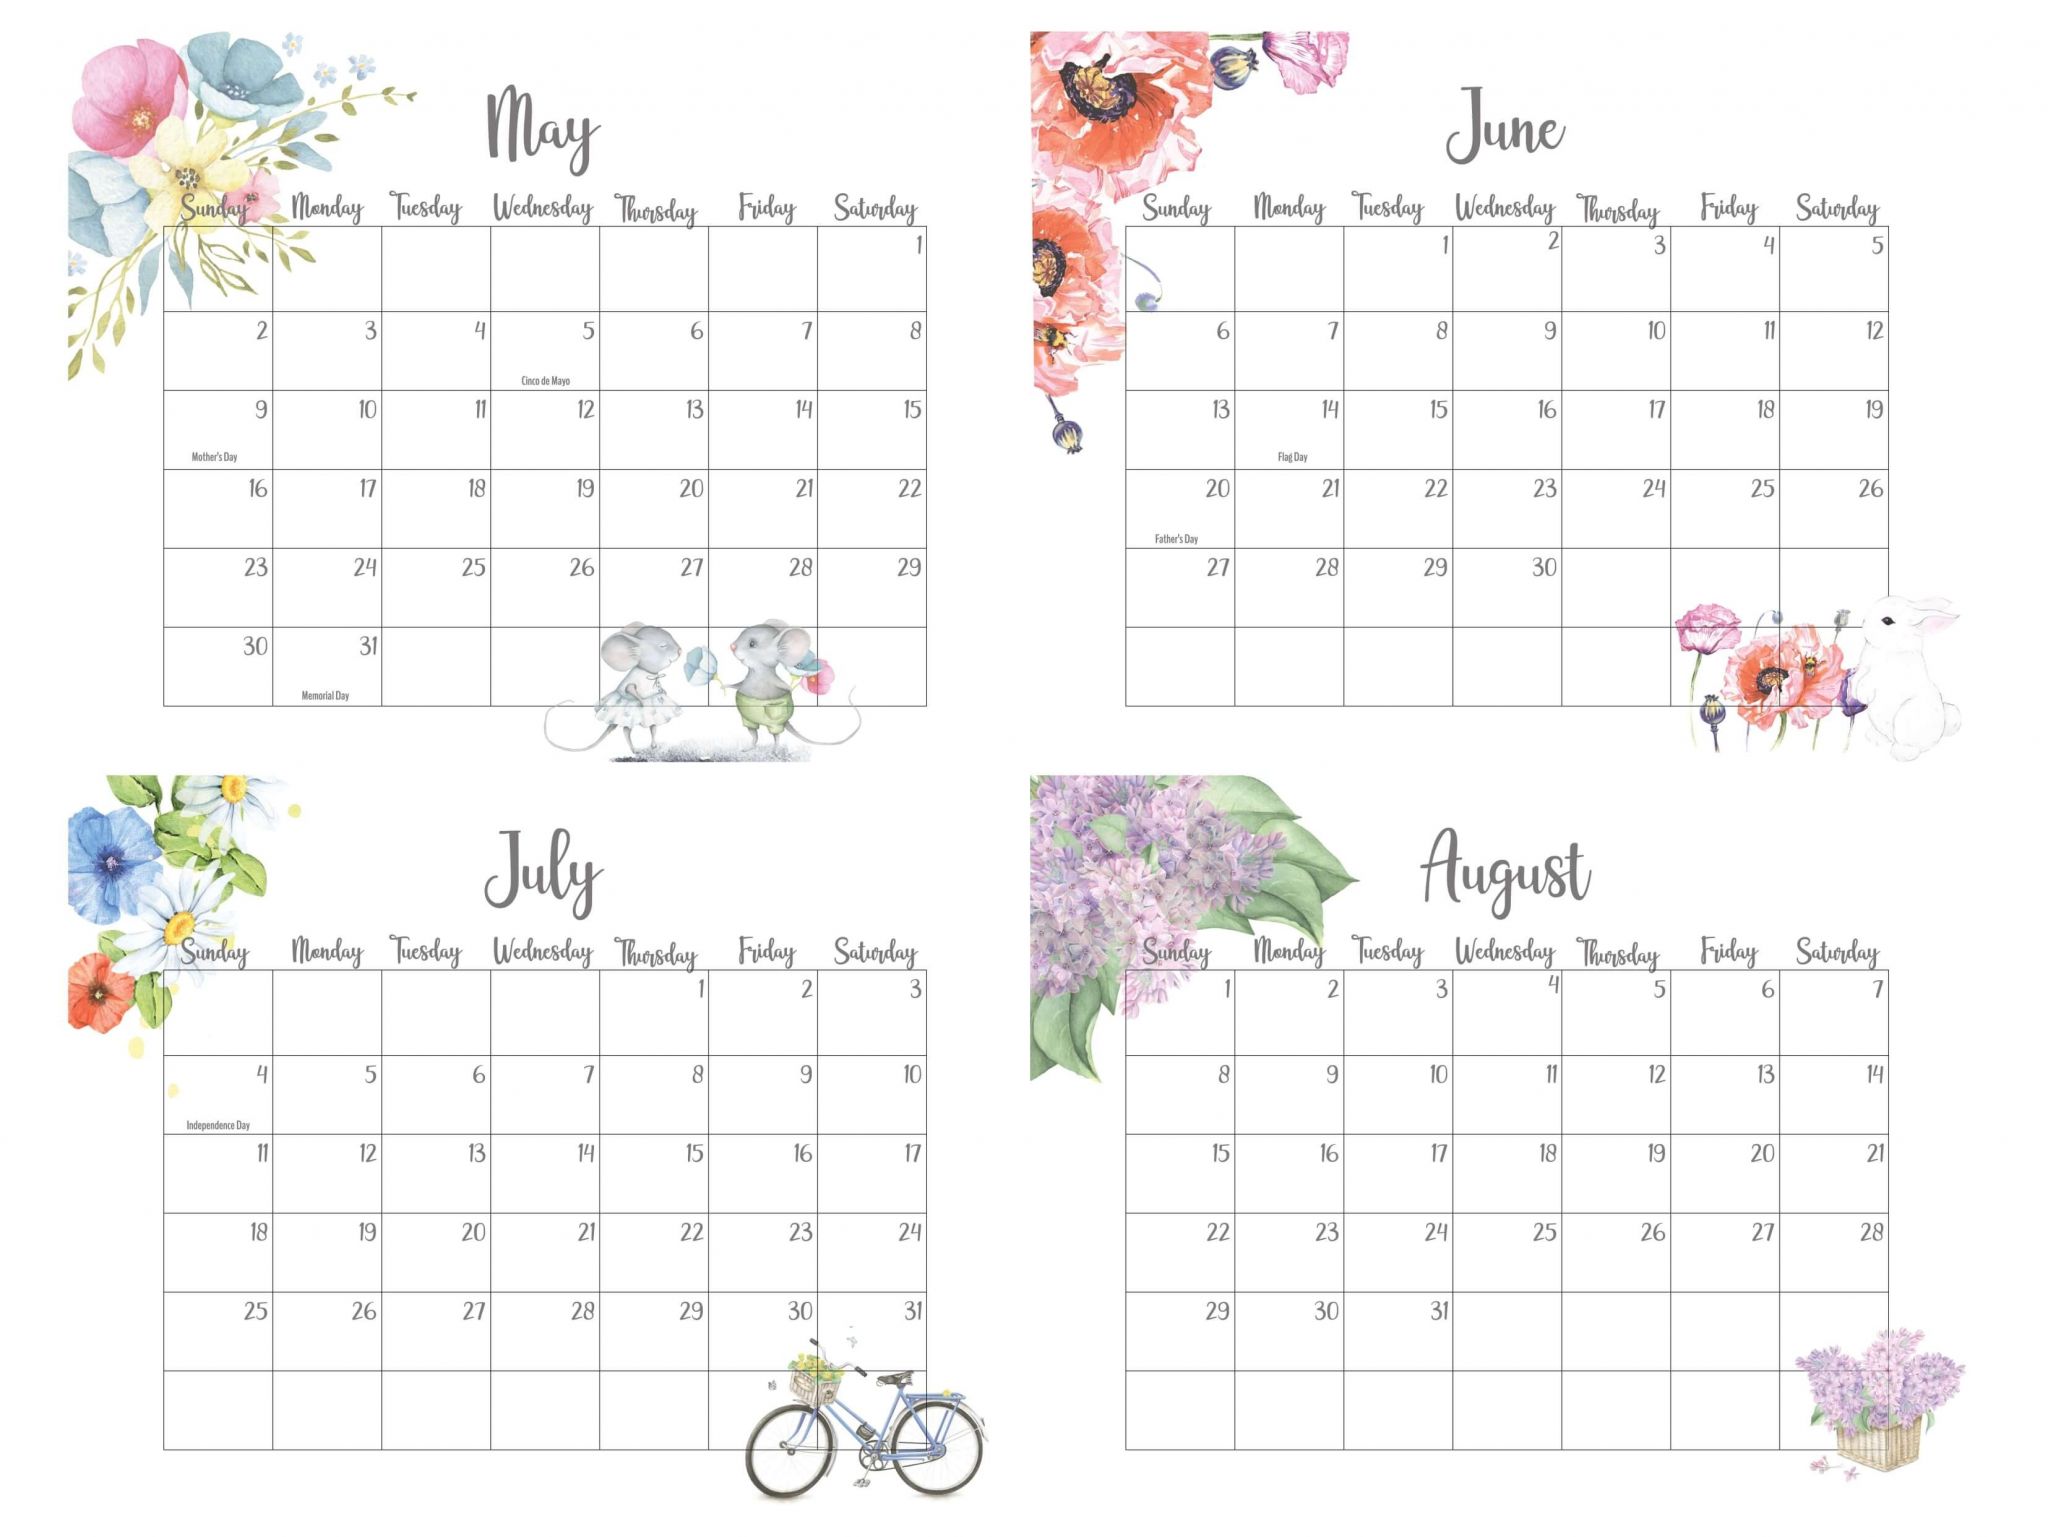 may to august 2021 calendar